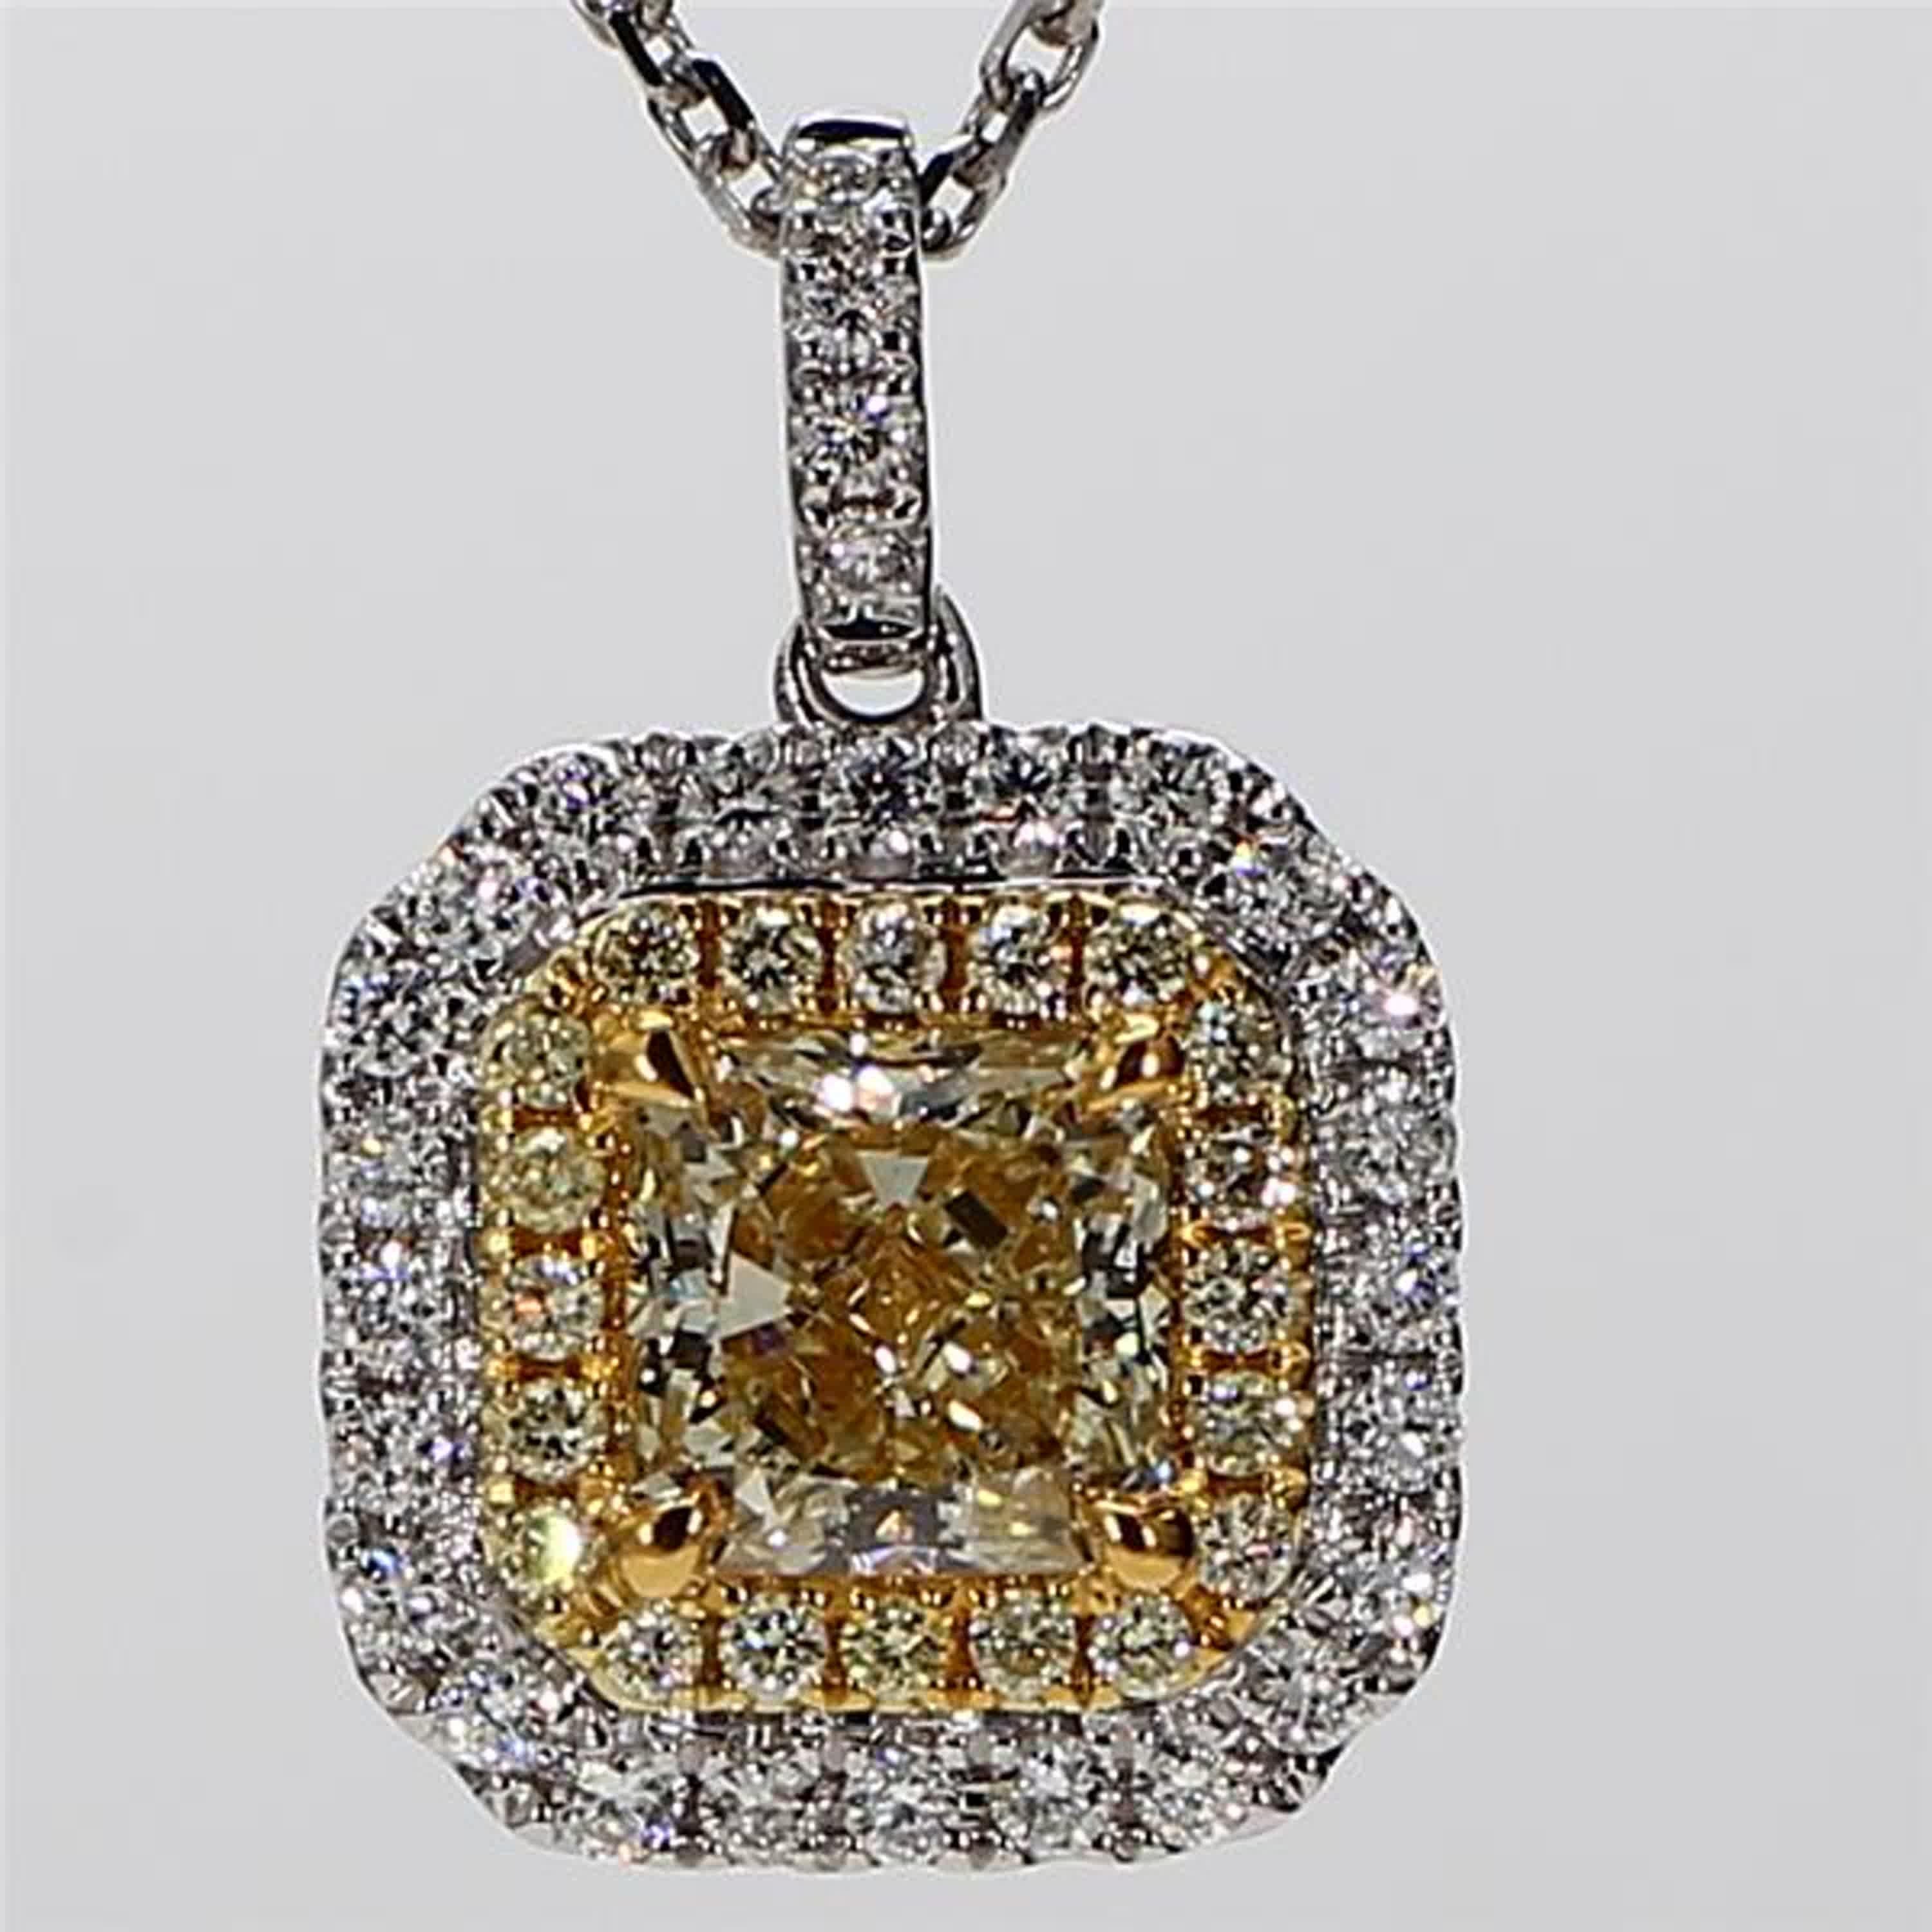 RareGemWorld's classic GIA certified diamond pendant. Mounted in a beautiful 18K Yellow and White Gold setting with natural radiant cut yellow diamonds. The yellow diamonds are surrounded by round natural yellow diamond melee and round natural white